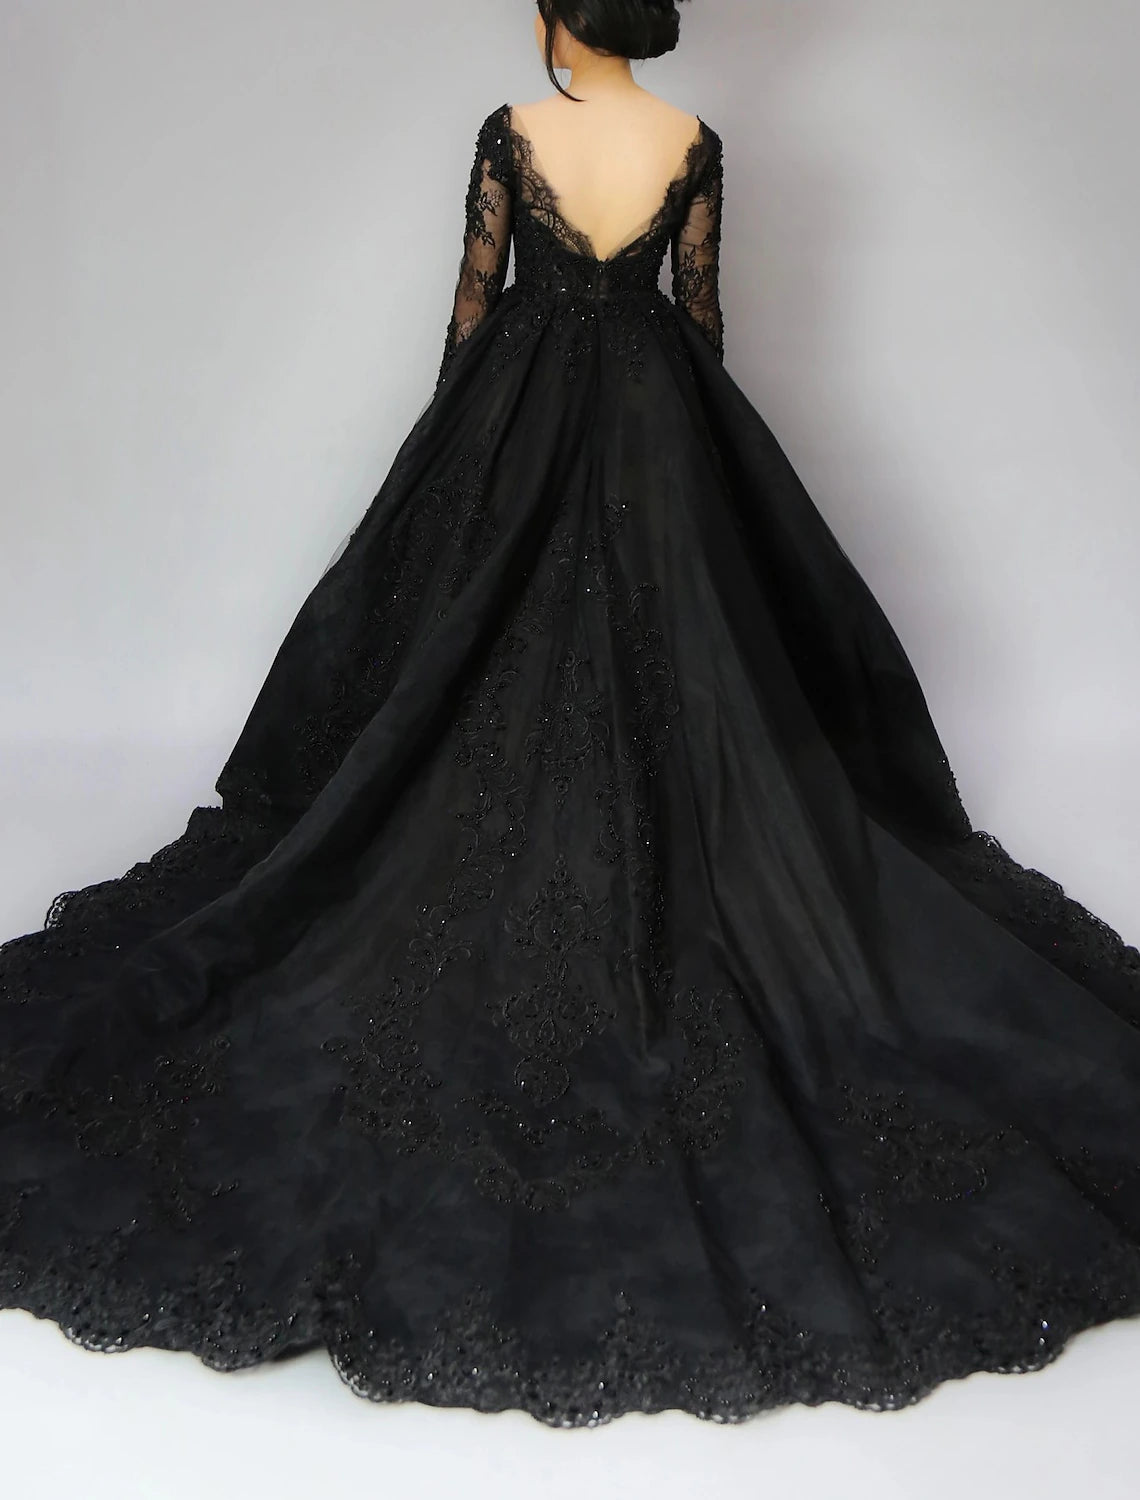 Black Wedding Dresses Formal Ball Gown V Neck Long Sleeve Chapel Train Lace Satin Gothic Fall Halloween Reception Bridal Gowns With Pleats Appliques